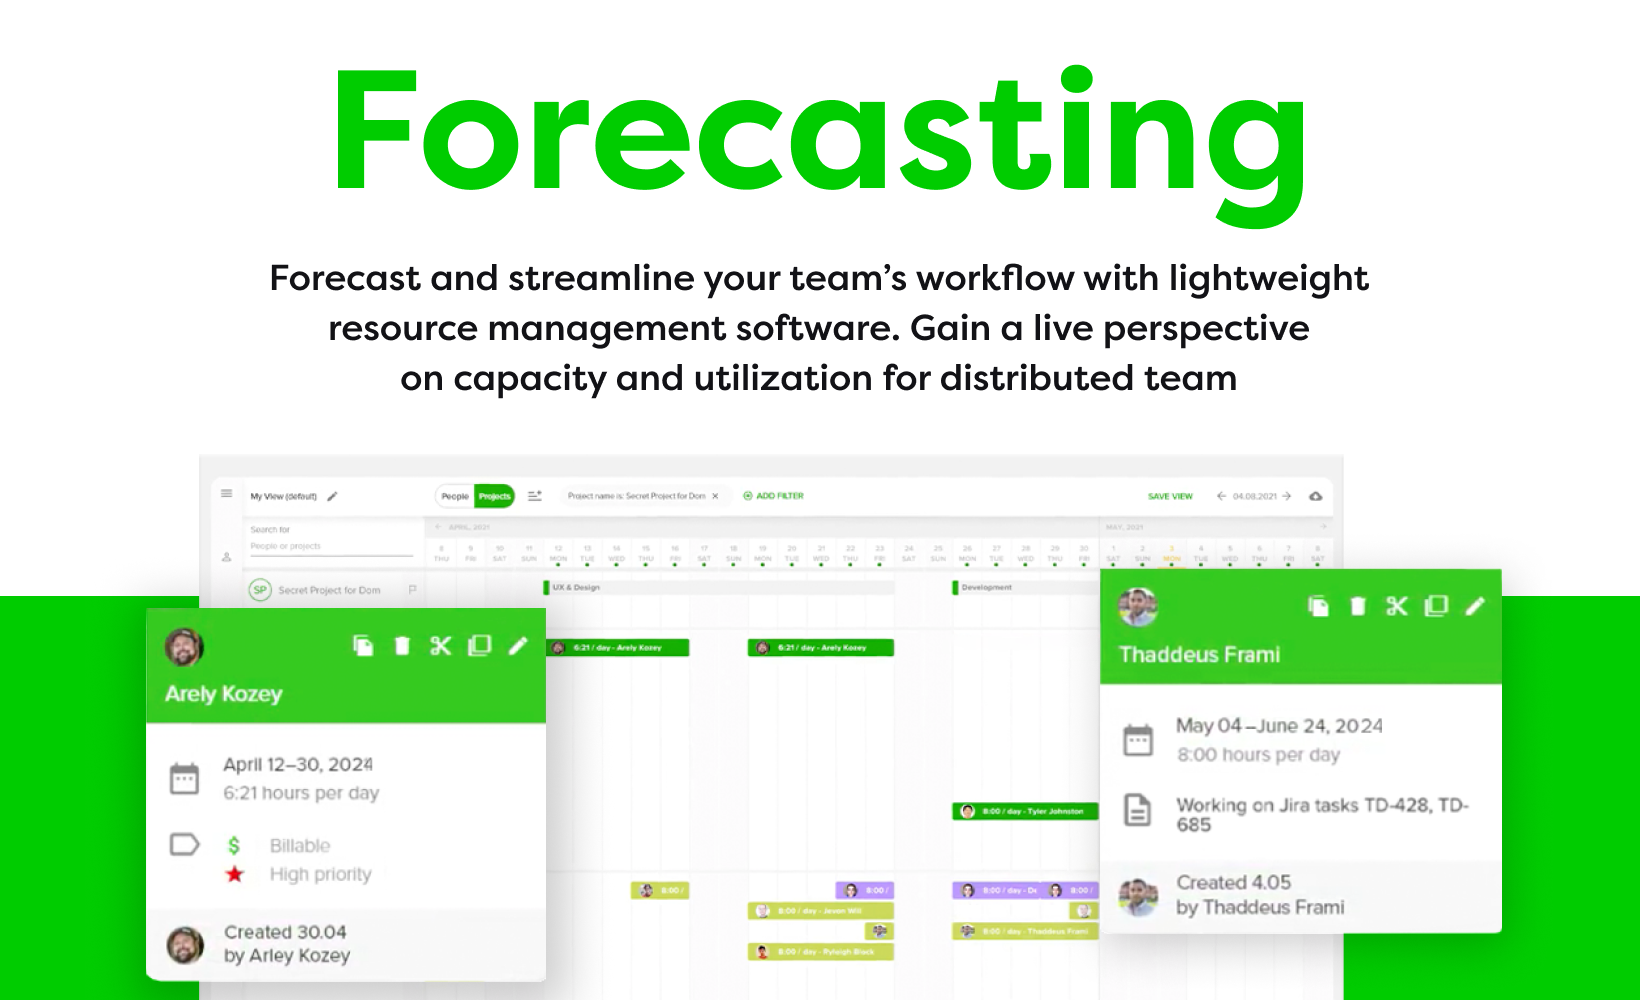 Forecast and streamline your team’s workflow with lightweight resource management software. 

